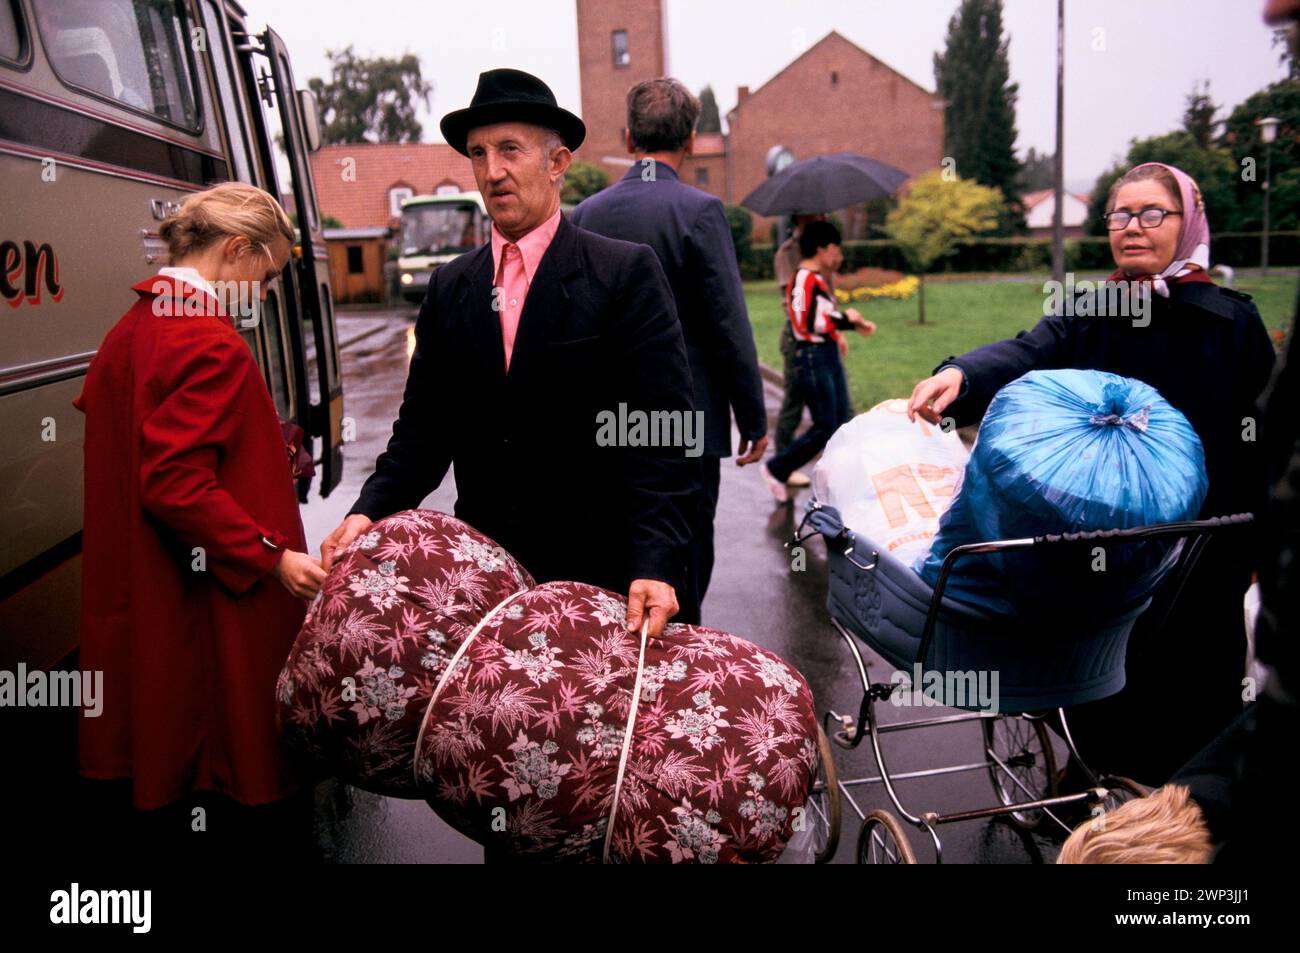 Friedland, Gottingen, Lower Saxony, Germany 1985. Friedland refugee camp, Russian Soviet-Germans return as refuges from the Soviet Union to freedom. This group of refugees leave the transit welcome camp with their belongings for a journey to a new life. During Perestroika in the 1980s, the Soviet borders were temporarily opened and the beginnings of a massive migration of Germans from the Soviet Union occurred. Entire families, and even villages, would leave their homes and relocate together in Germany or Austria. HOMER SYKES Stock Photo